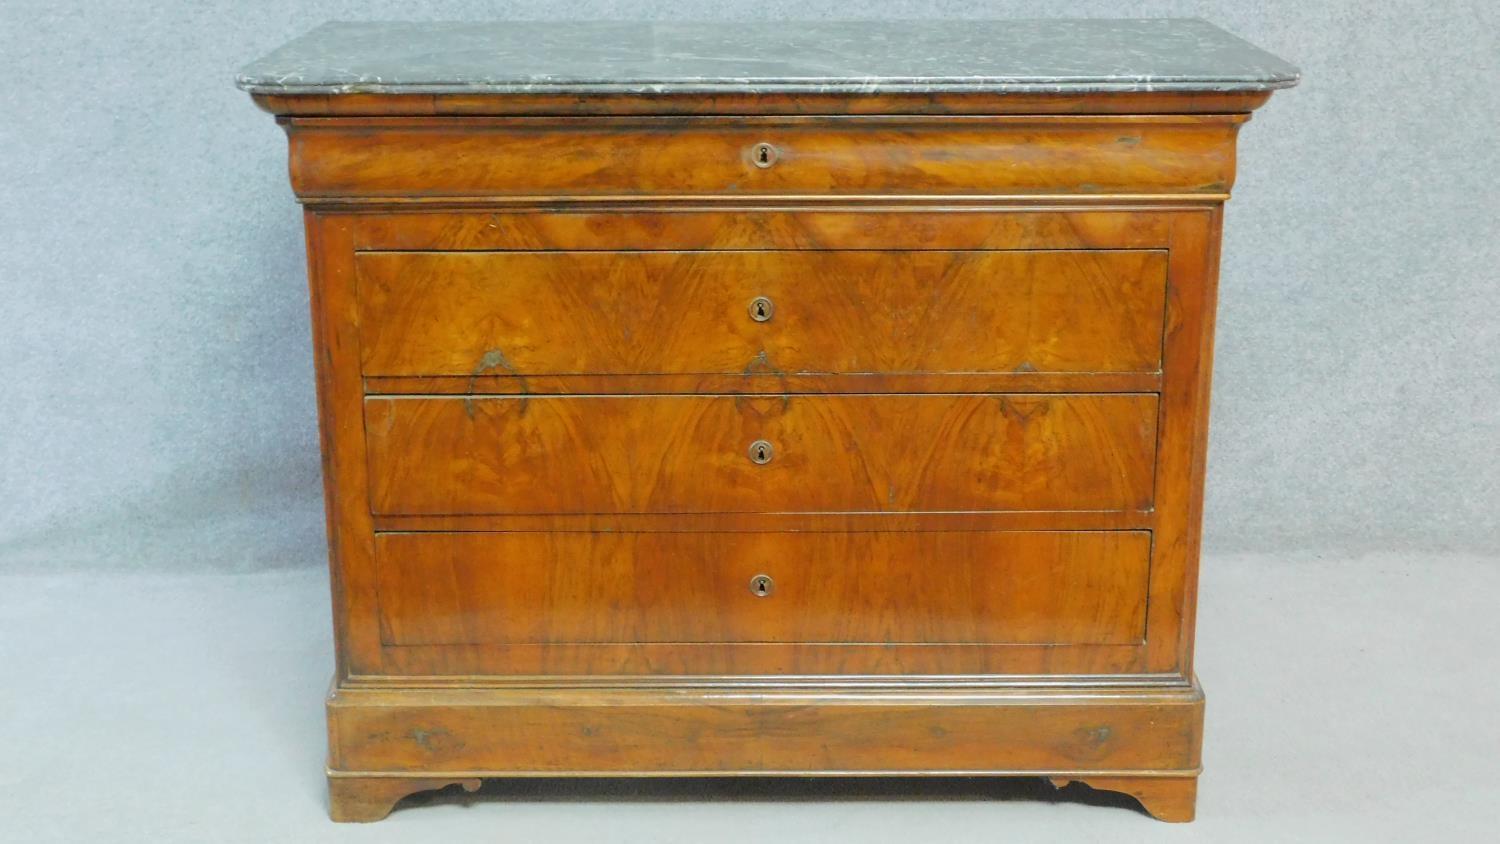 A late 19th century French Louis Philippe burr walnut commode with grey veined marble top and four